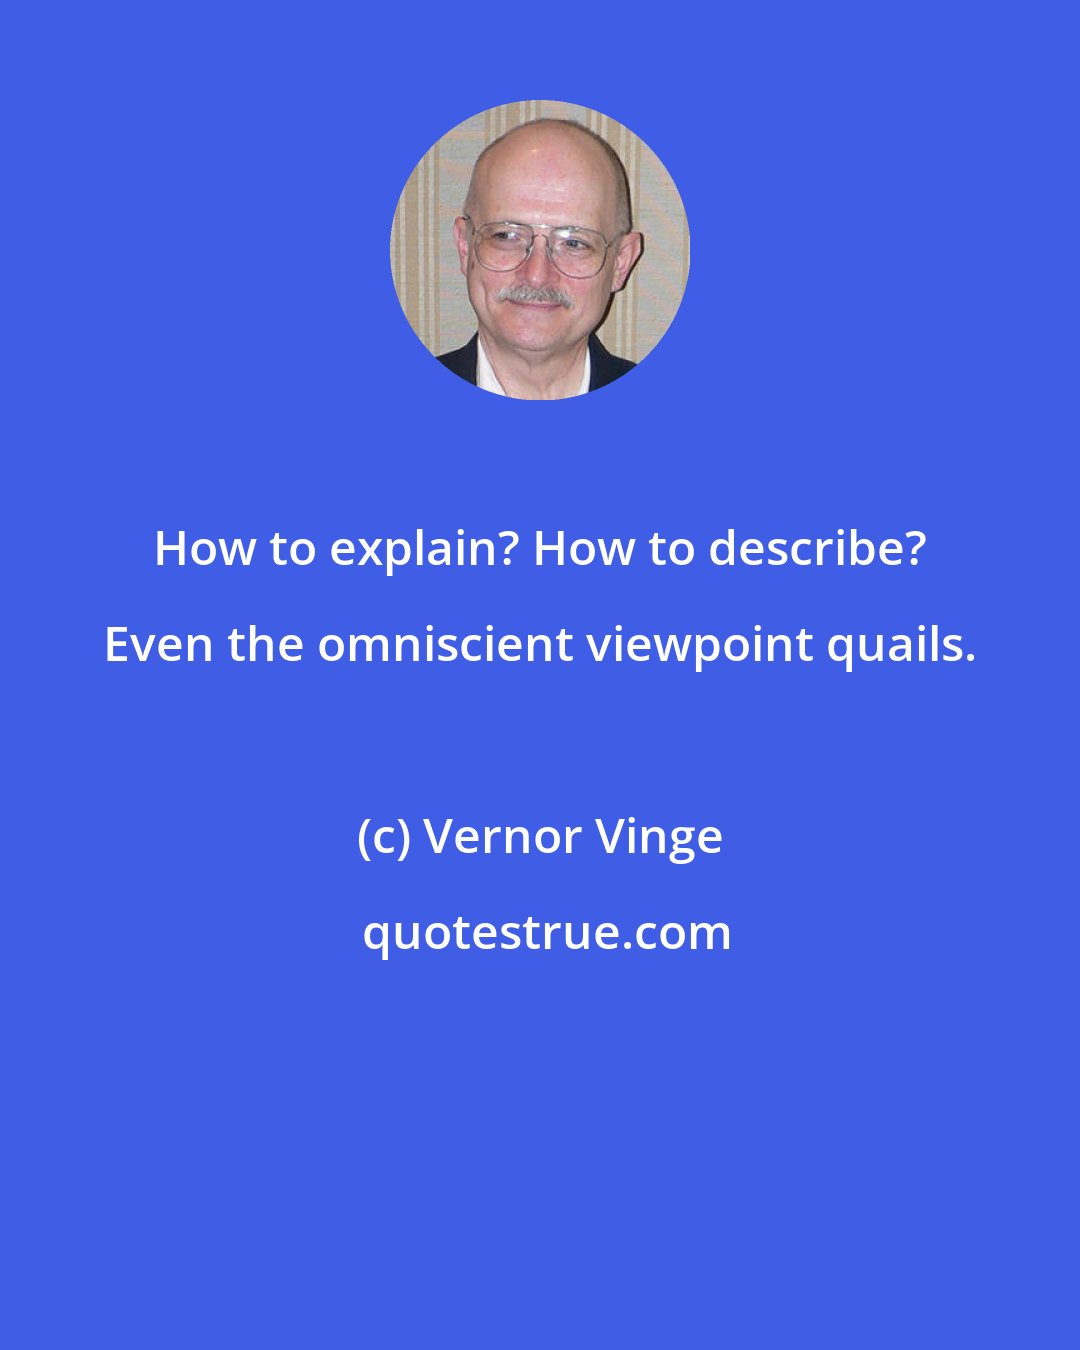 Vernor Vinge: How to explain? How to describe? Even the omniscient viewpoint quails.